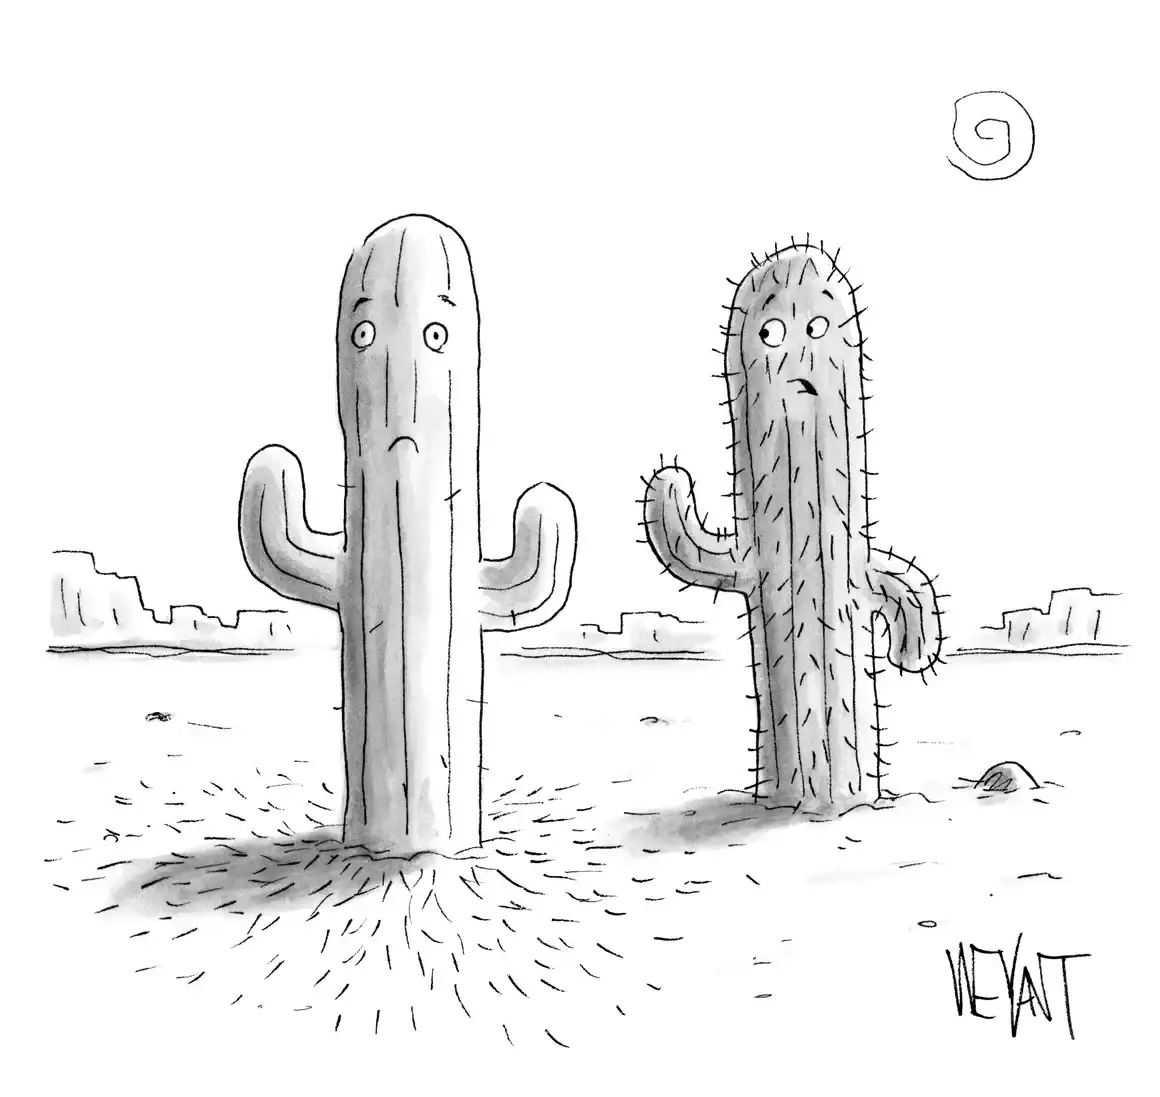 Two cacti next to each other in the desert. The one on the left has lost all of its needles. The one on the right is looking at it in shock.